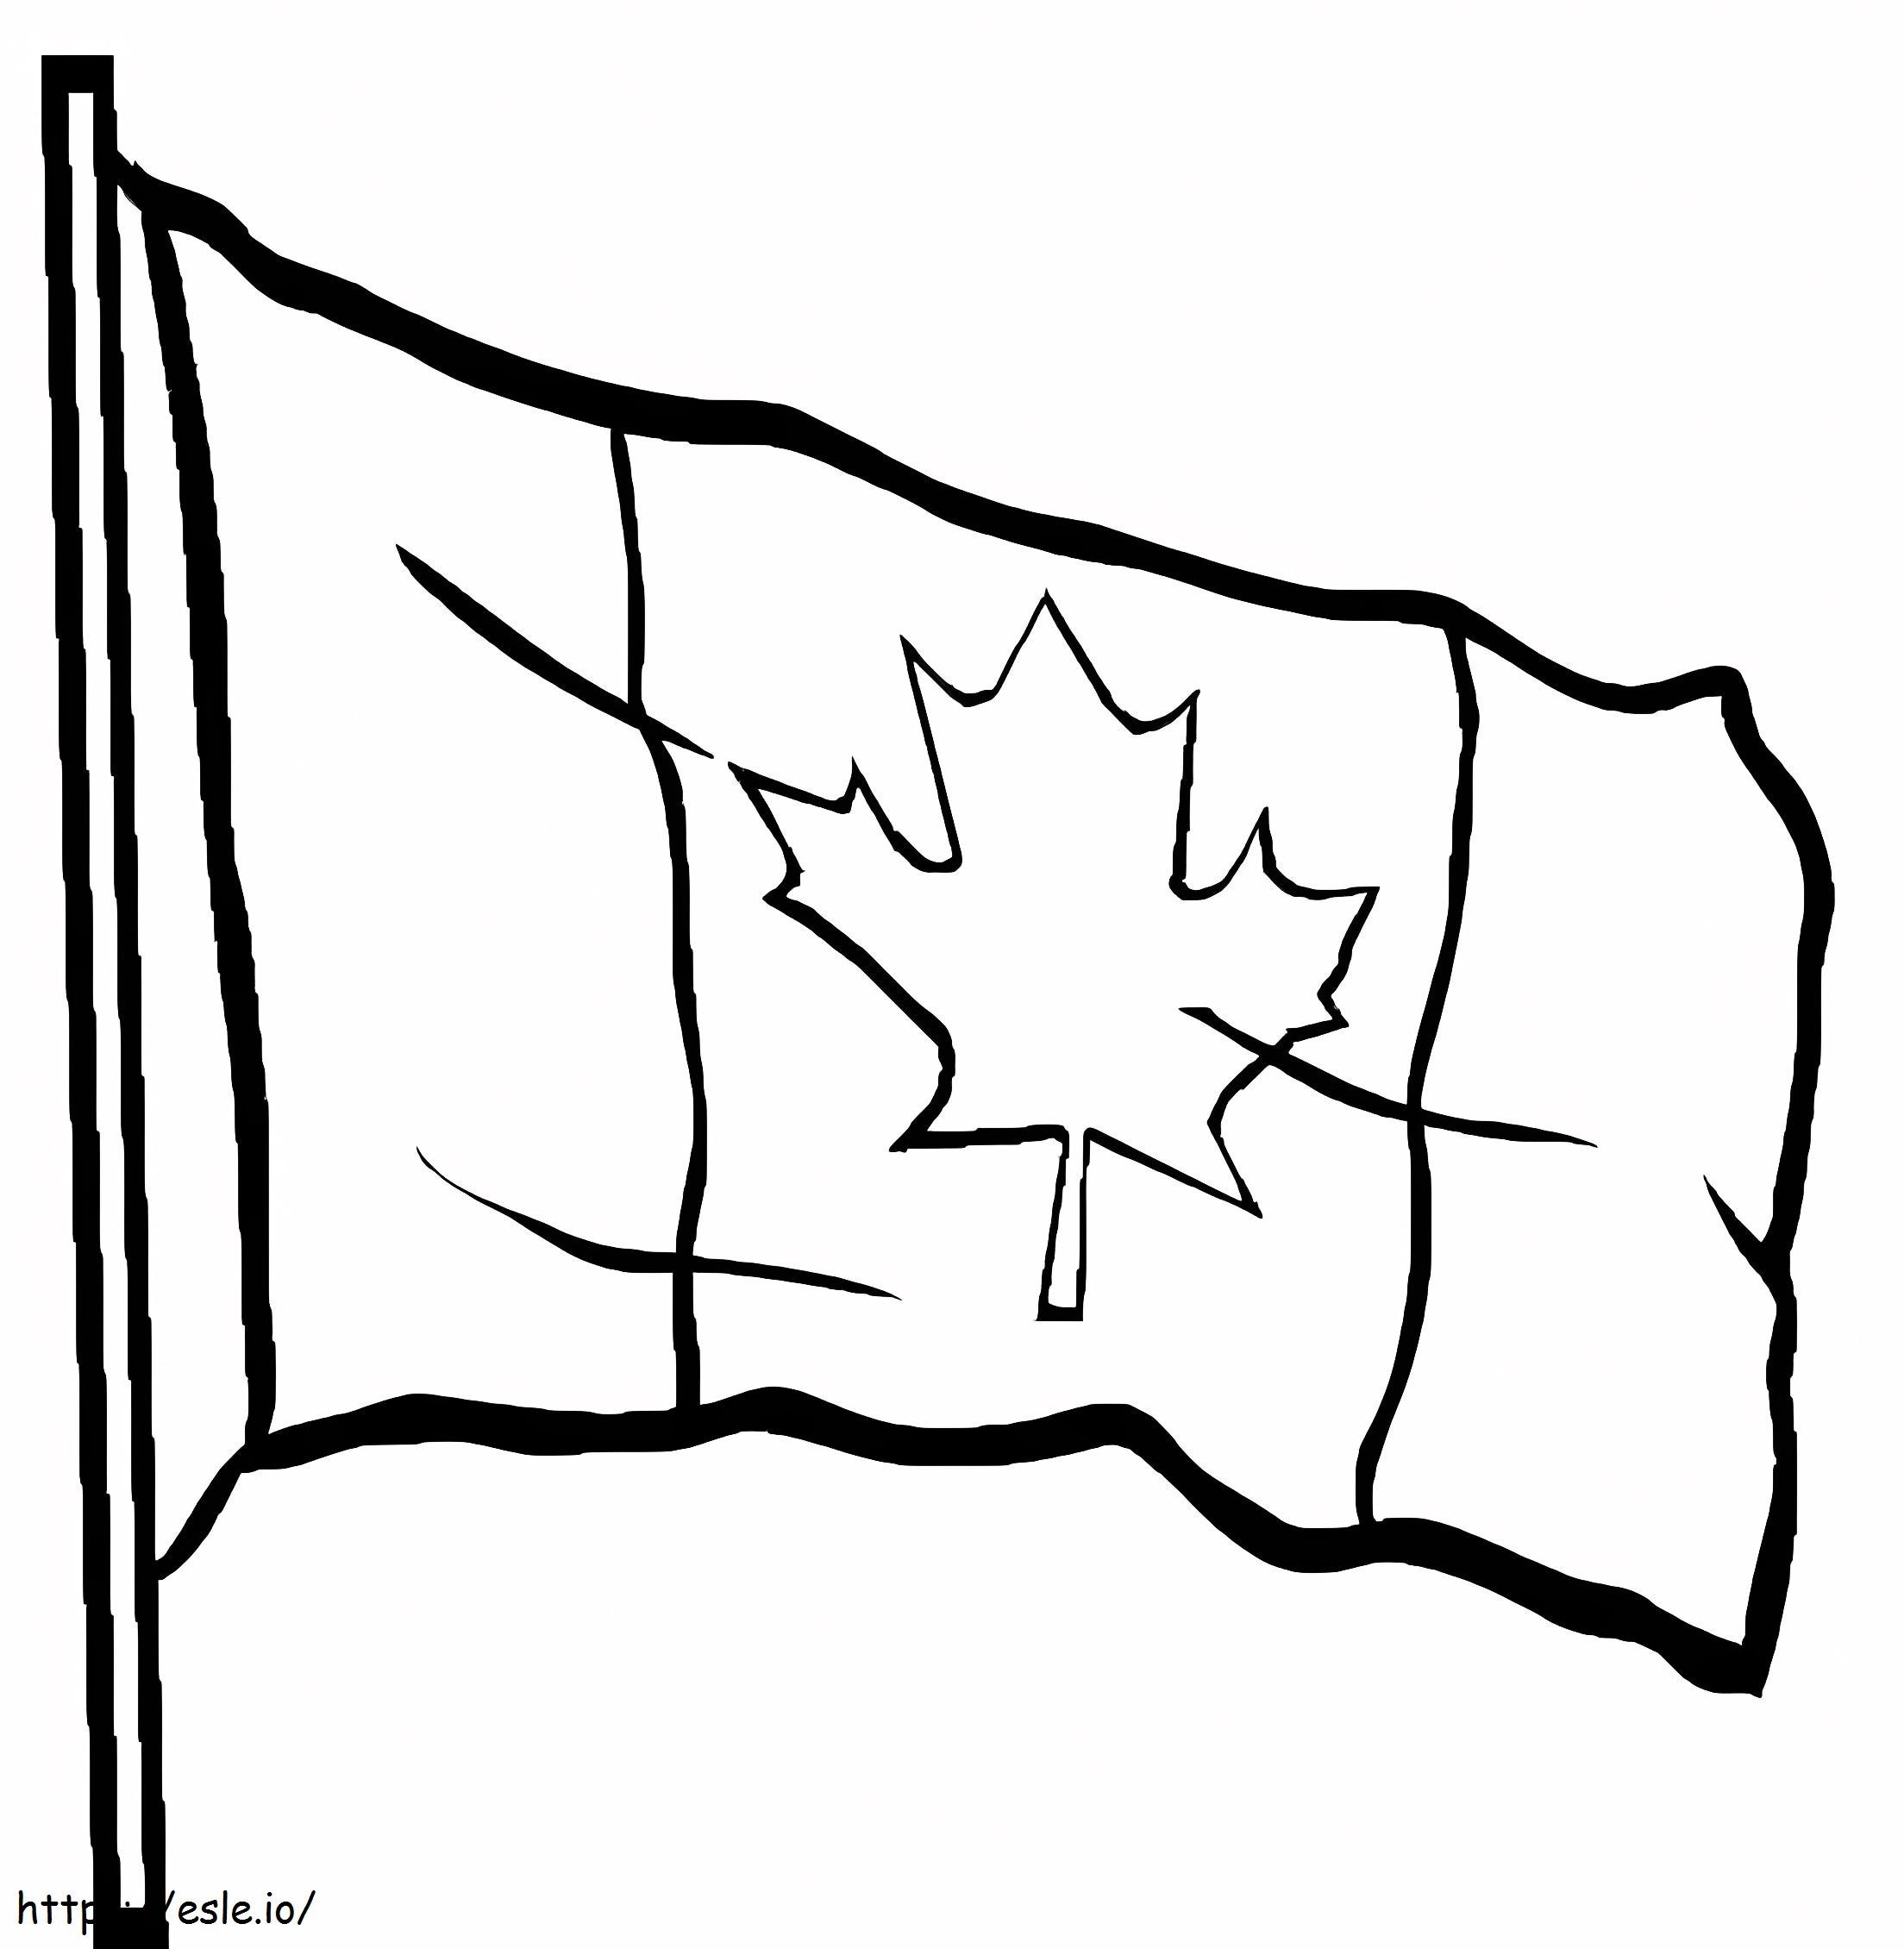 Canadian Flag 2 coloring page